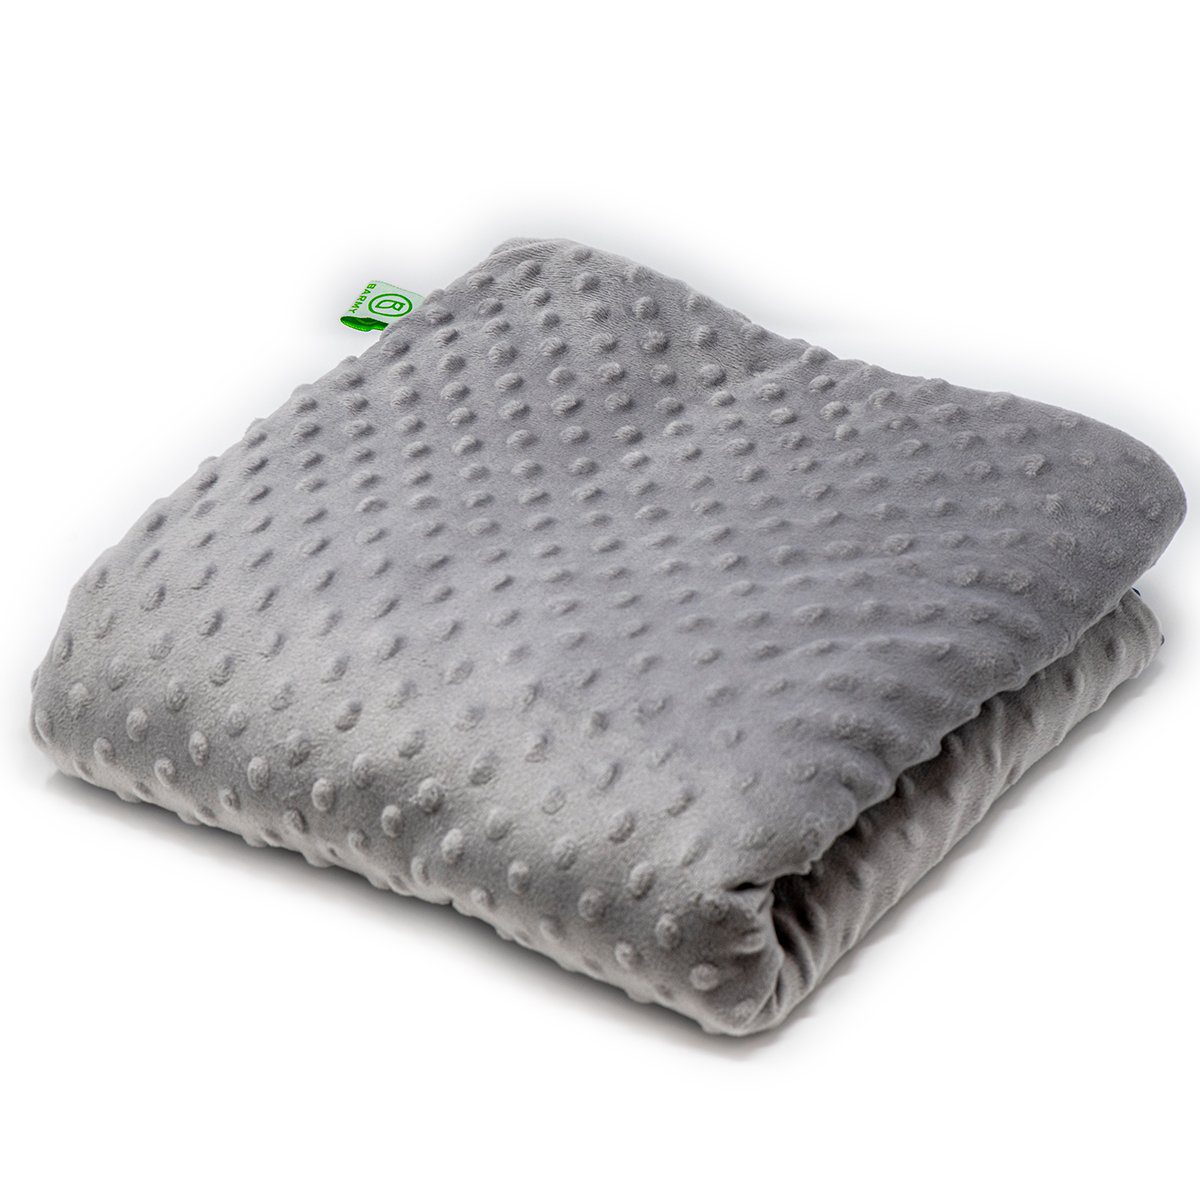 Weighted Blanket/Large Lap Blanket – Therapy in a Bin